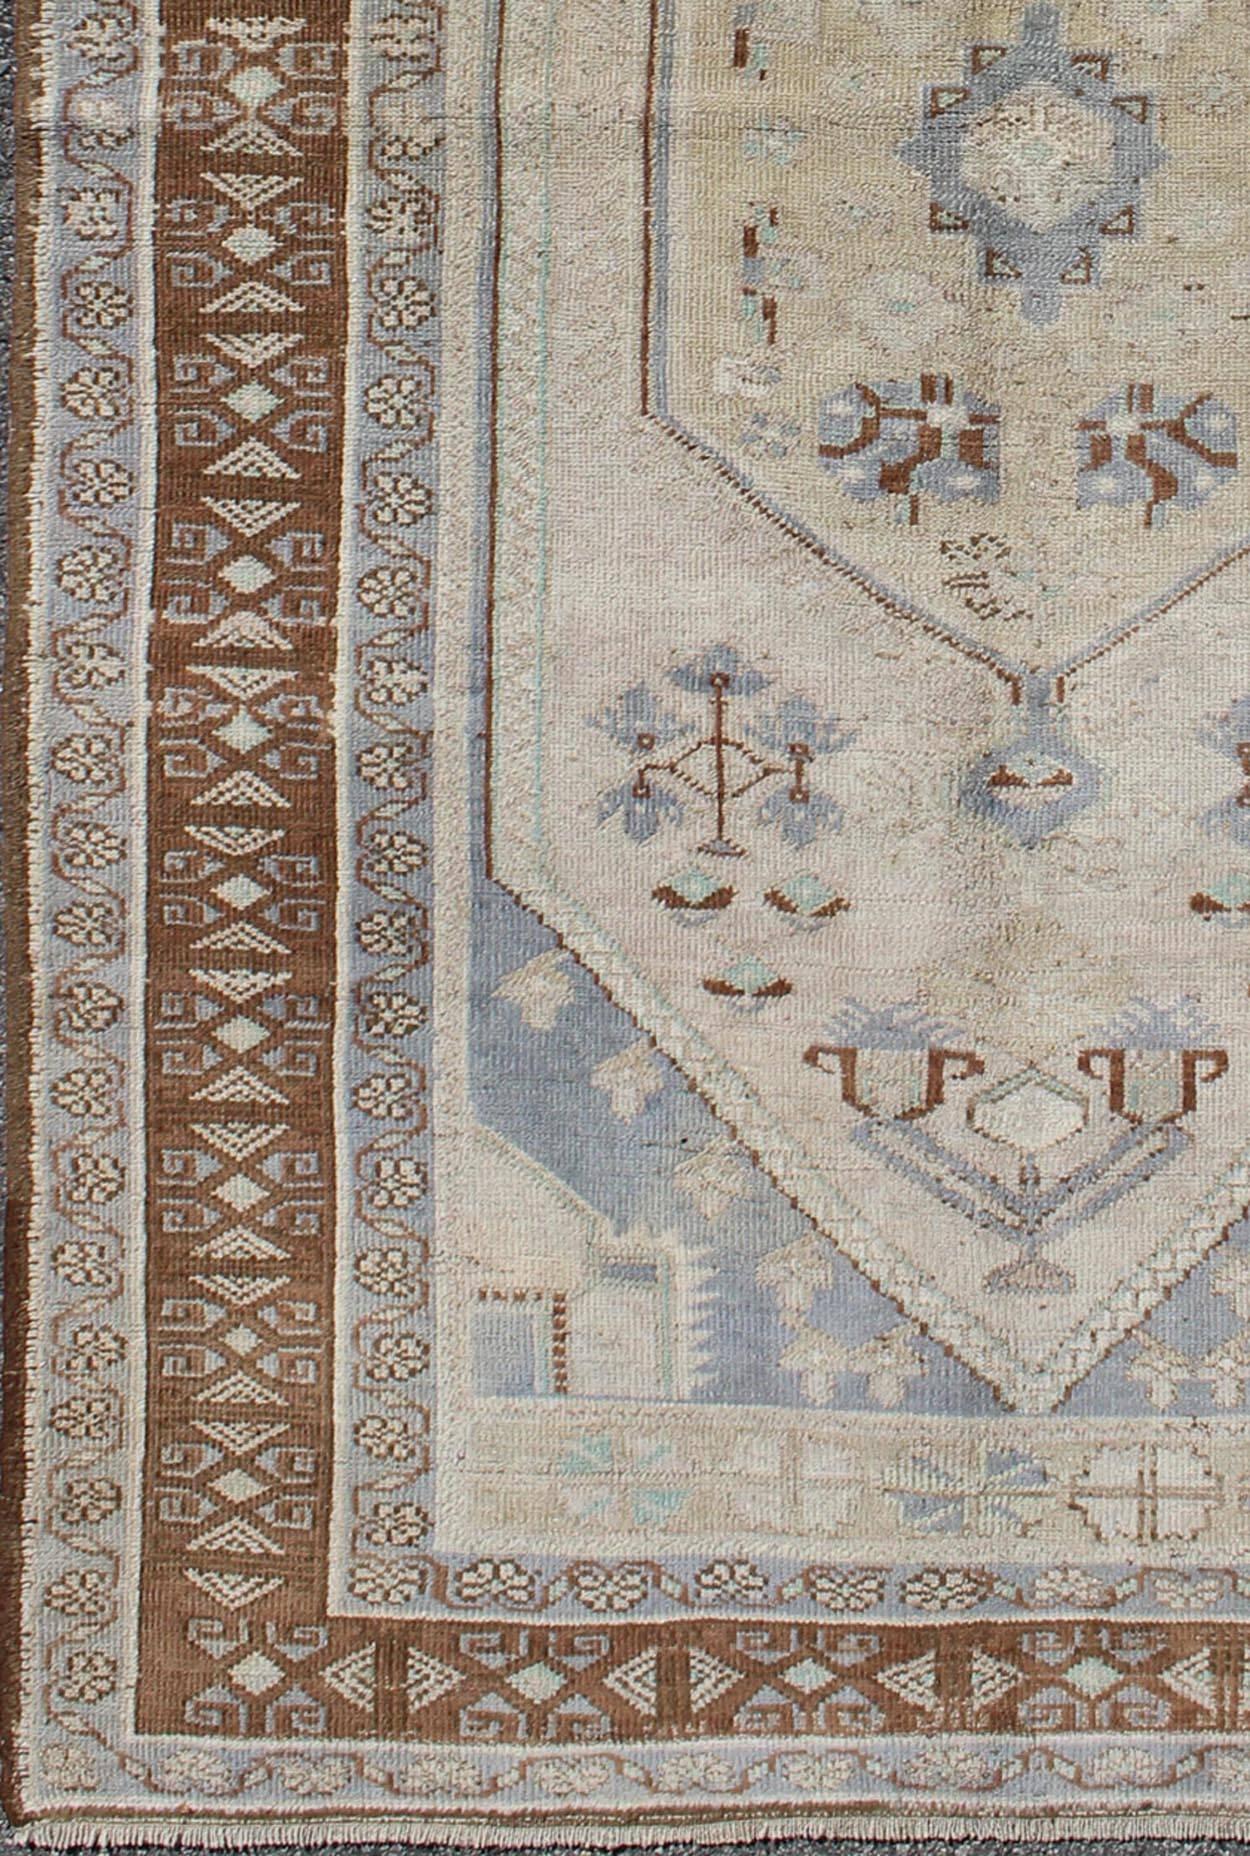 Brown, ivory, and gray vintage Turkish Oushak rug with tribal motifs and medallion, rug mtu-95175, country of origin / type: Turkey / Oushak, circa mid-20th century

This vintage Turkish Oushak rug, (circa mid-20th century) features a unique blend